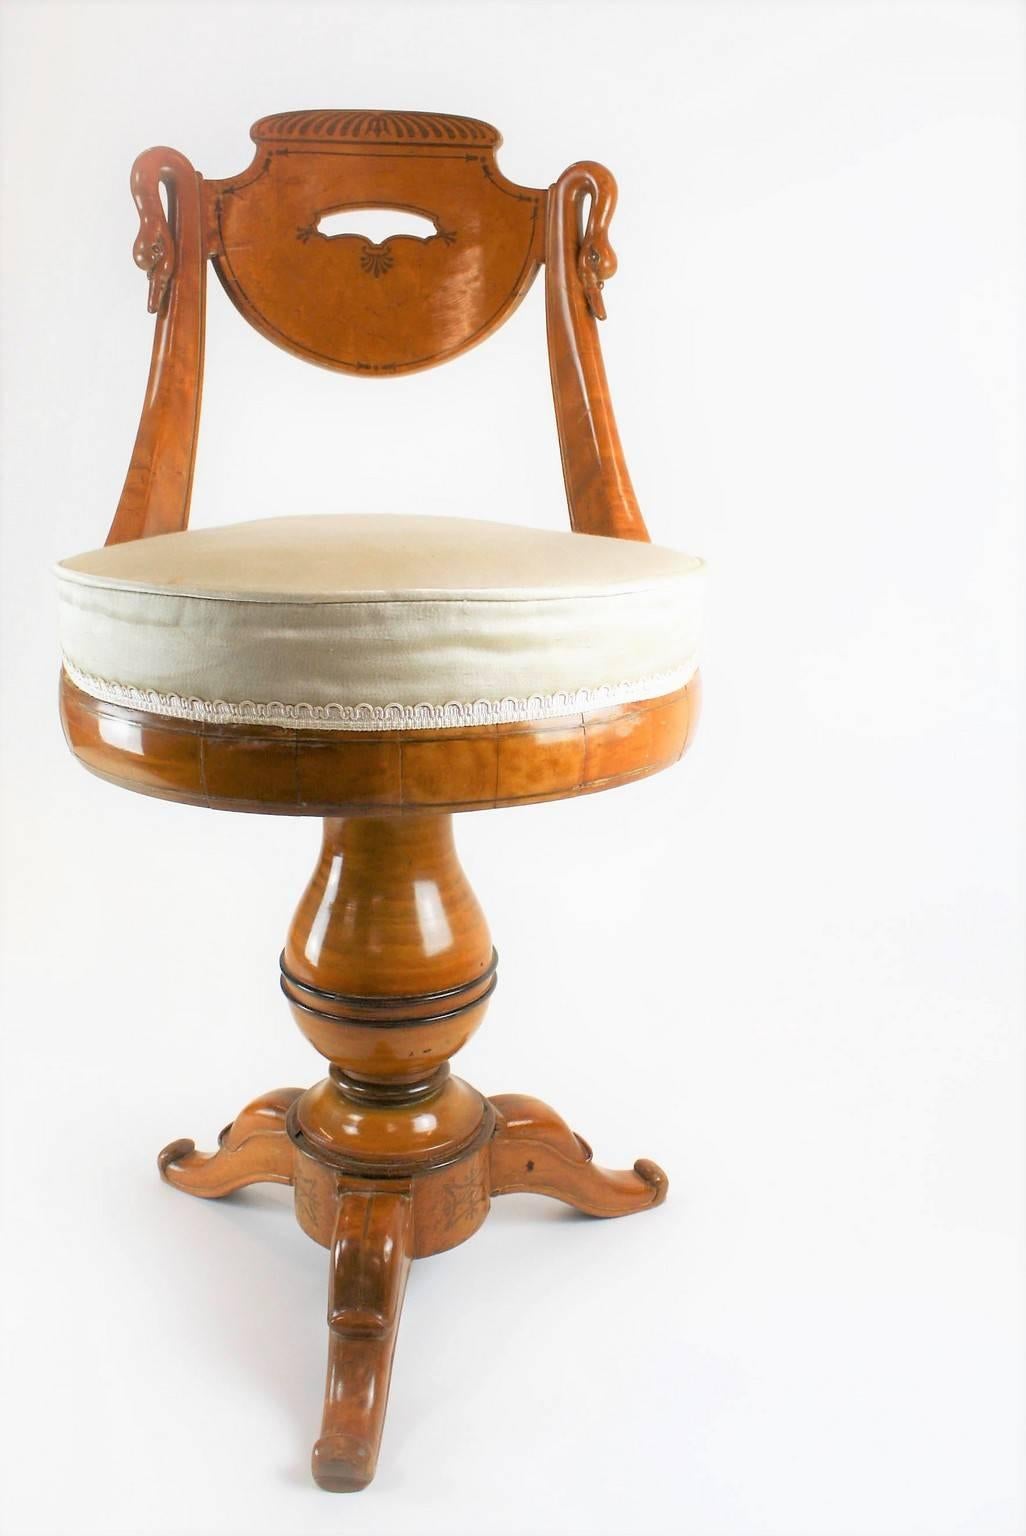 Exquisite and rare French Charles X - Restauration Harpist swivel chair in solid Maple wood with amaranth filets.
Gooseneck design in the back side, Palm leaf motif made up of stylised leaves and floral arabesques, around the back.
The tripod base